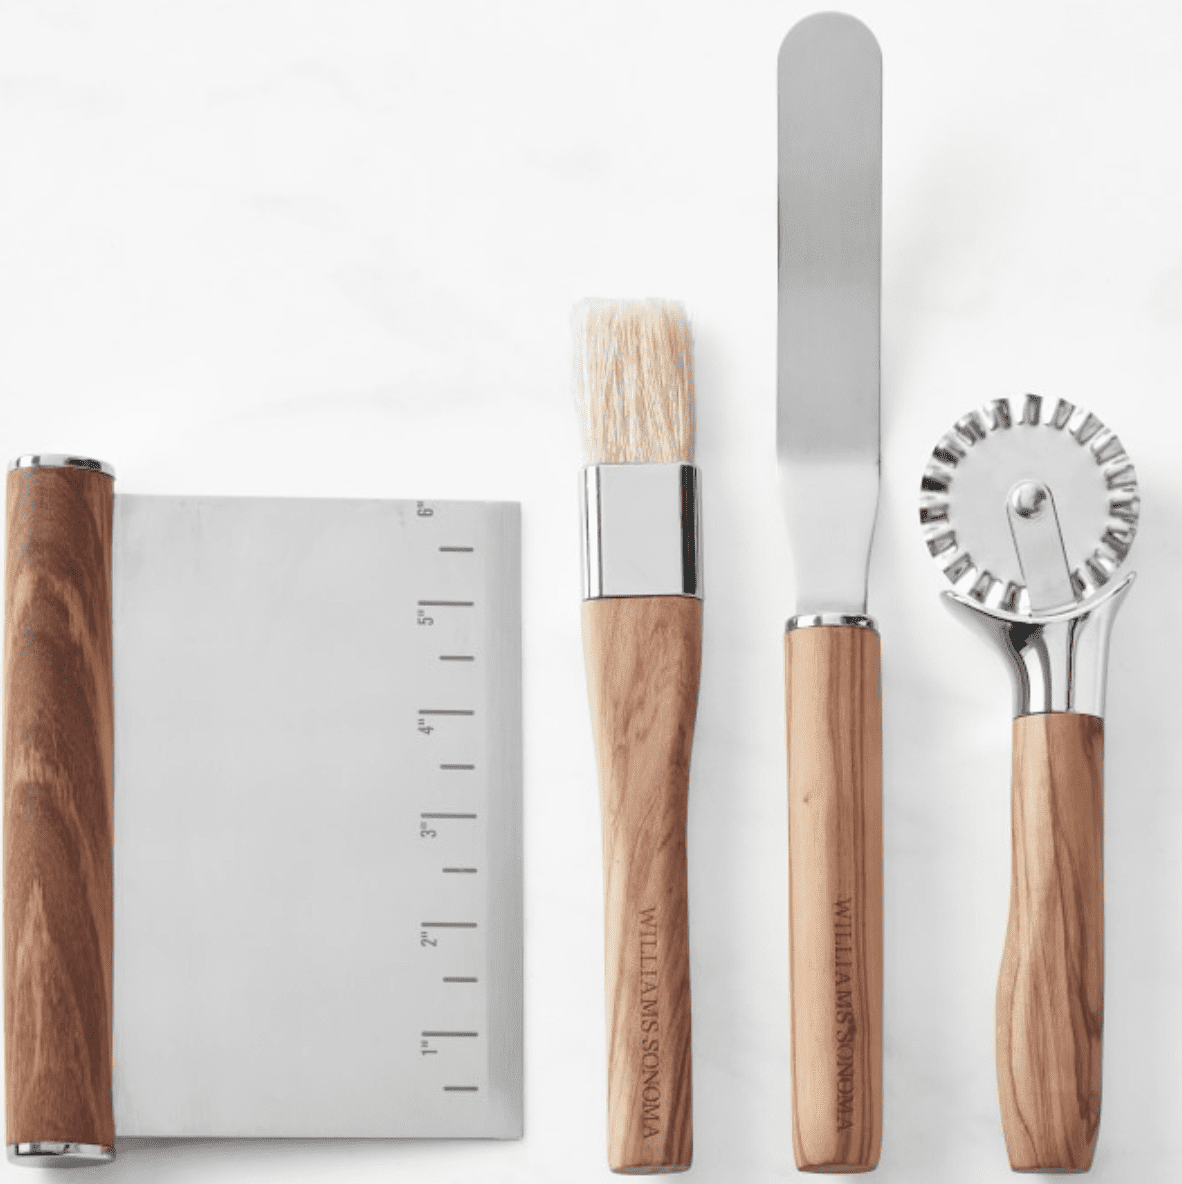 Williams-Sonoma Olivewood Pastry Tools, Set of 4